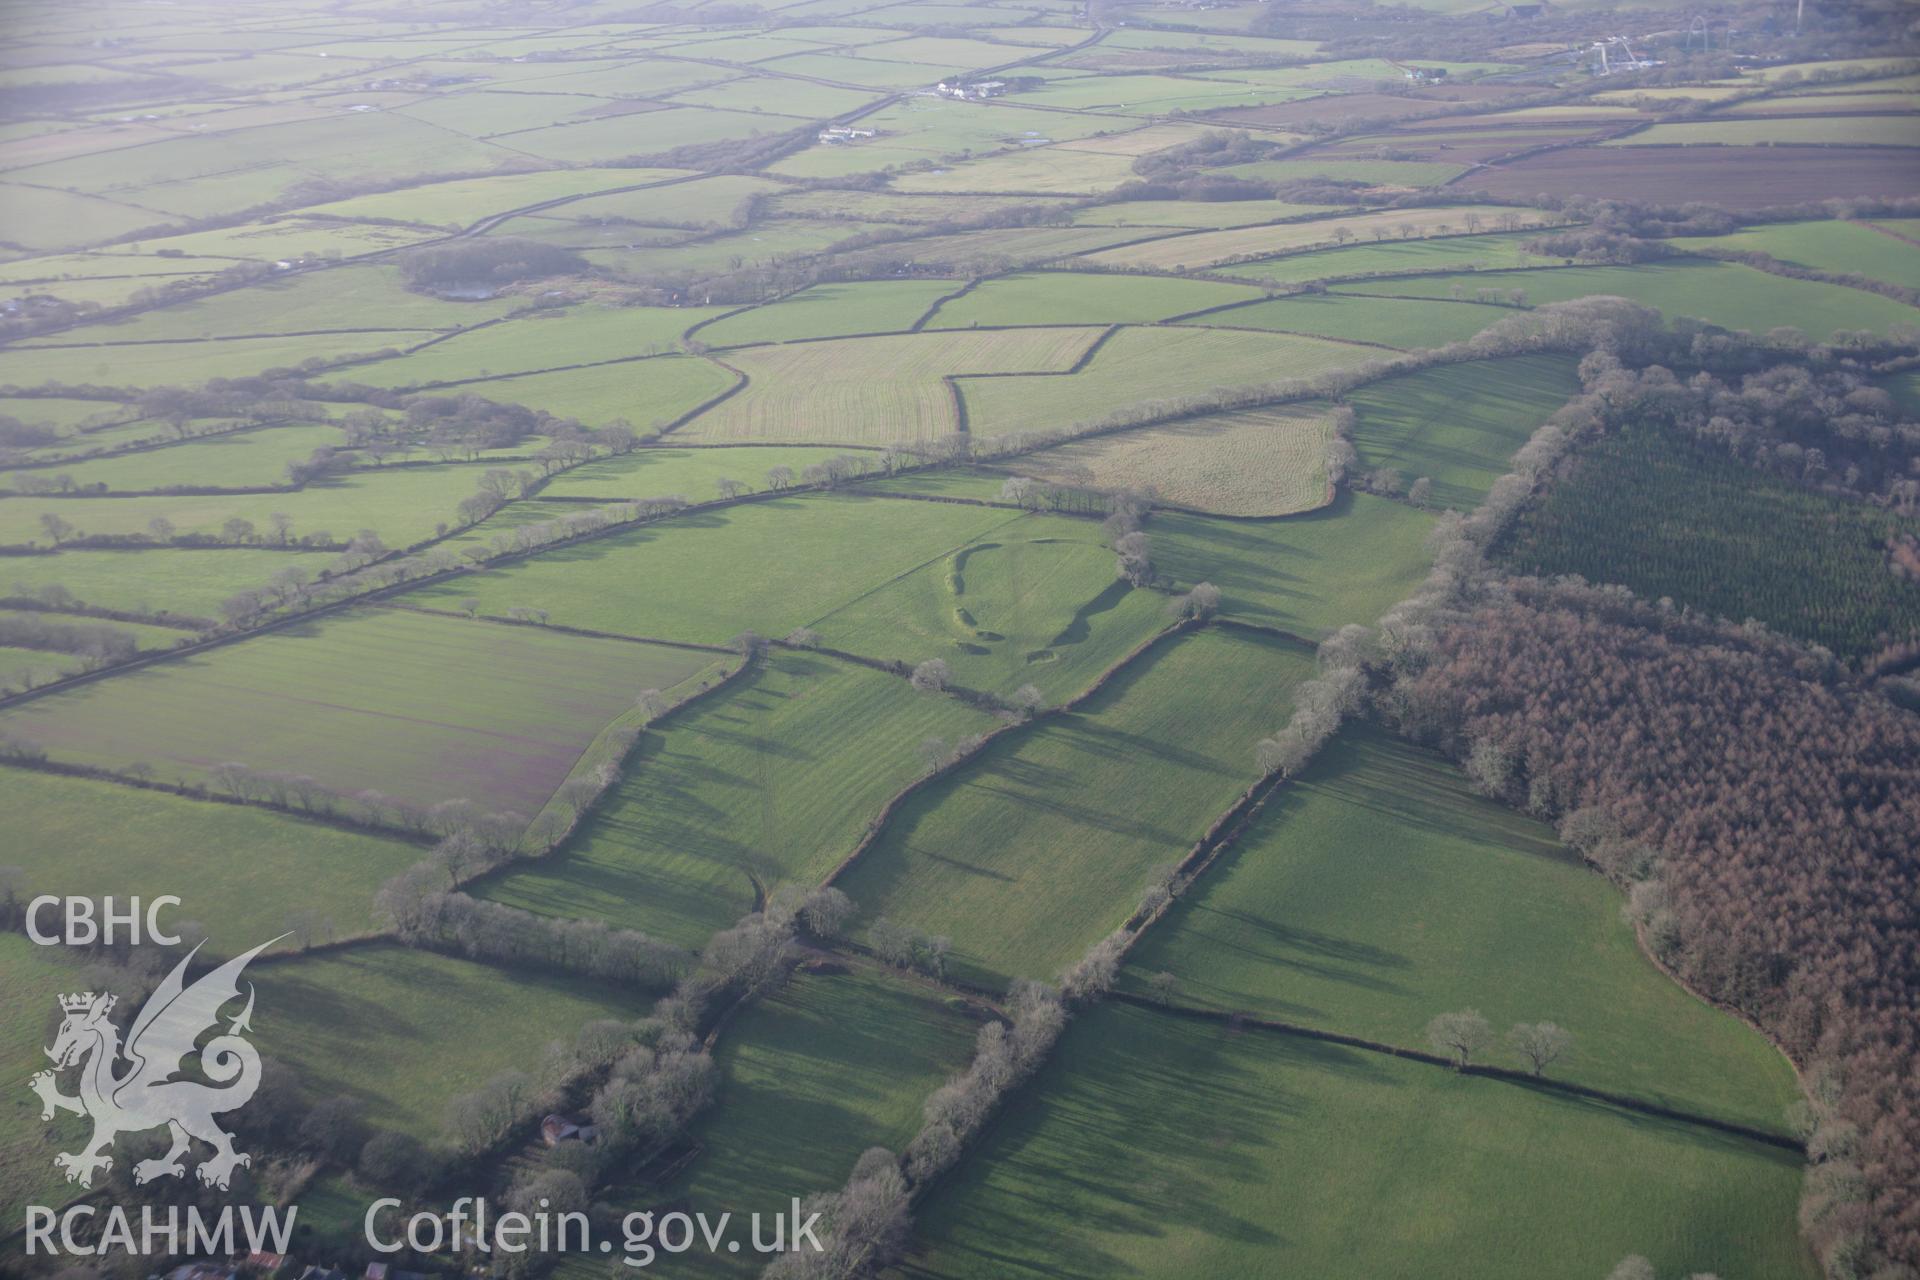 RCAHMW colour oblique aerial photograph of Molleston Back Hillfort Enclosure, in long landscape viewed from the east. Taken on 11 January 2006 by Toby Driver.